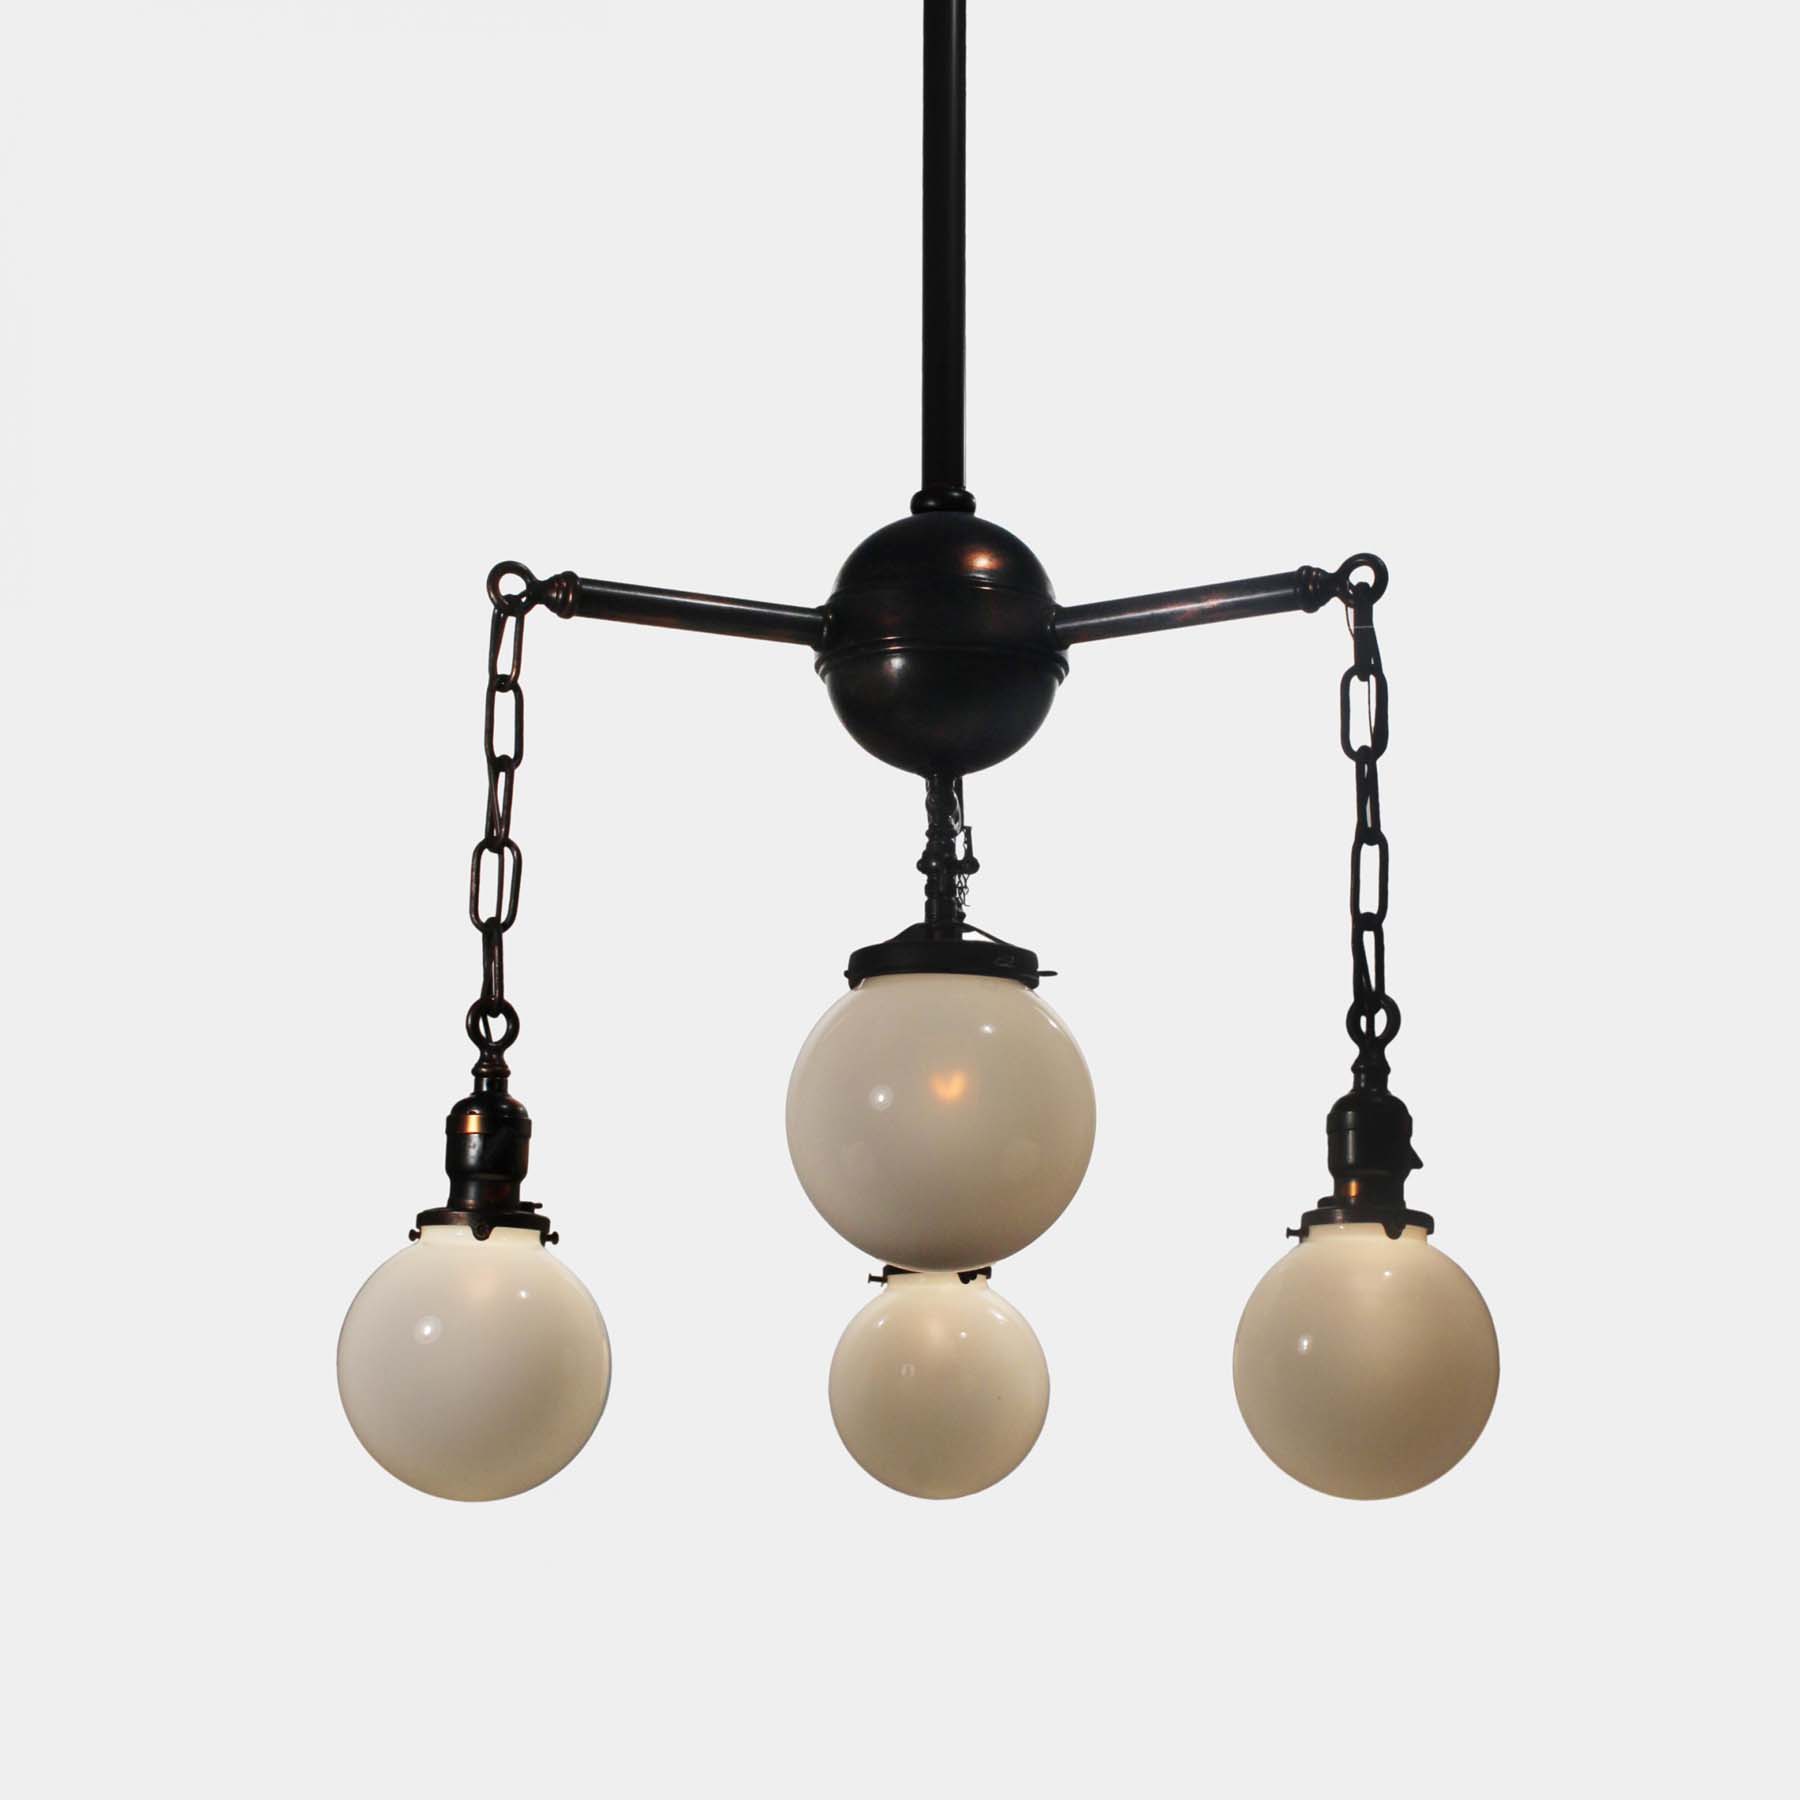 SOLD Antique Four-Light Chandeliers with Glass Globes, Early 1900’s-67229